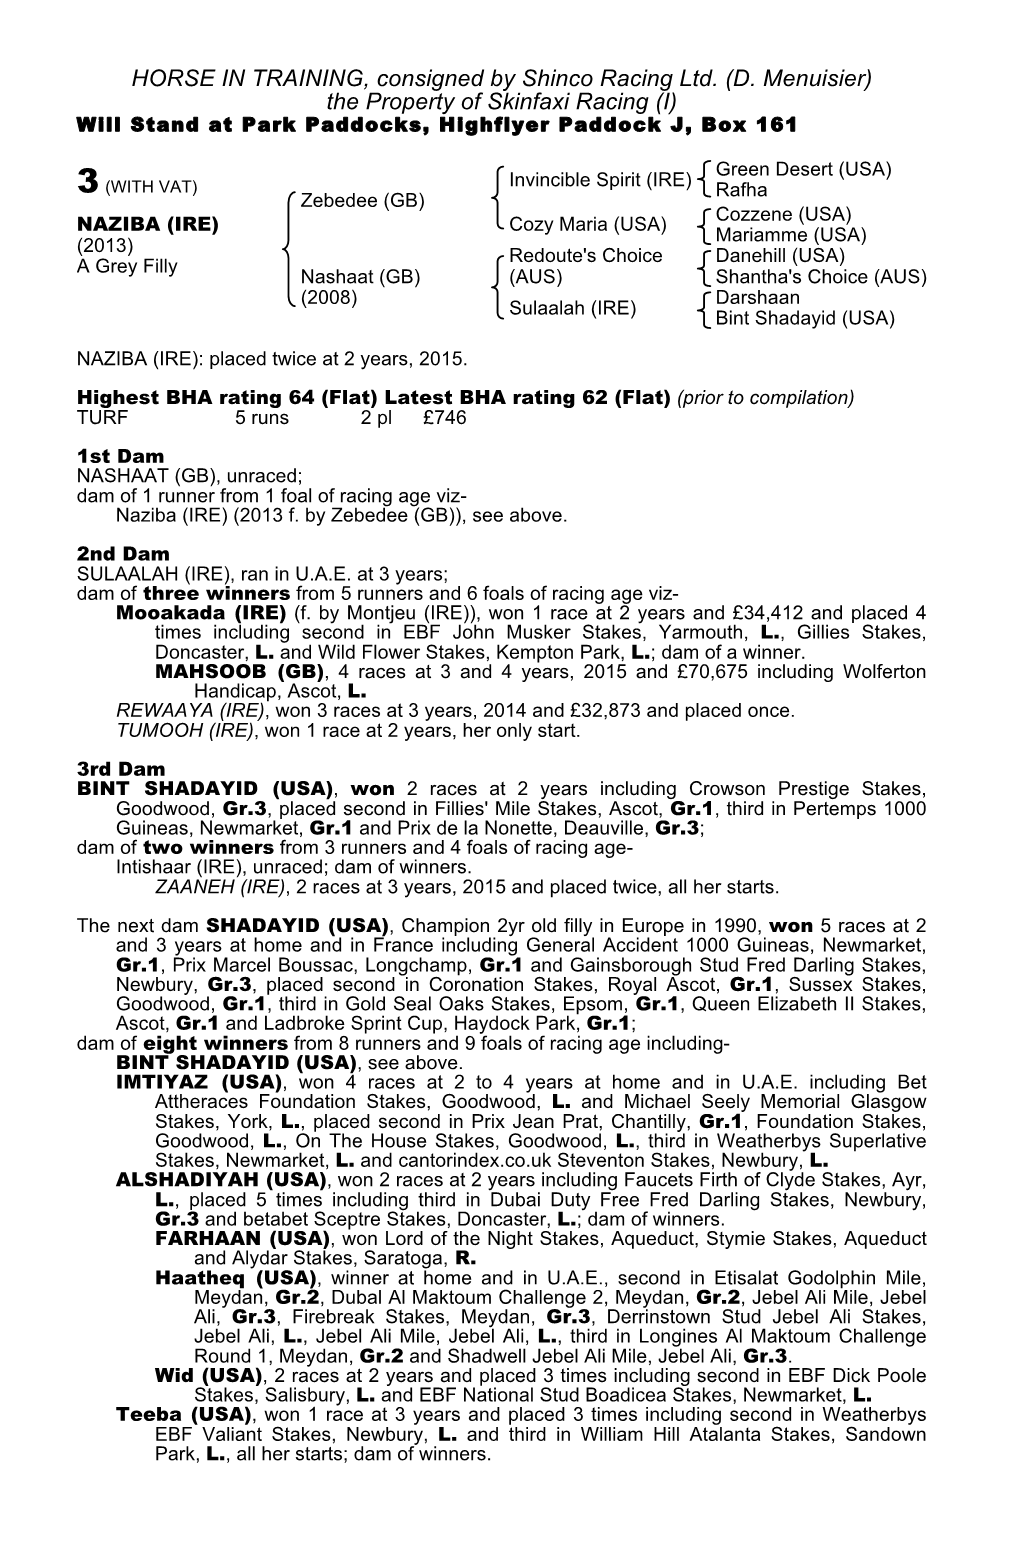 HORSE in TRAINING, Consigned by Shinco Racing Ltd. (D